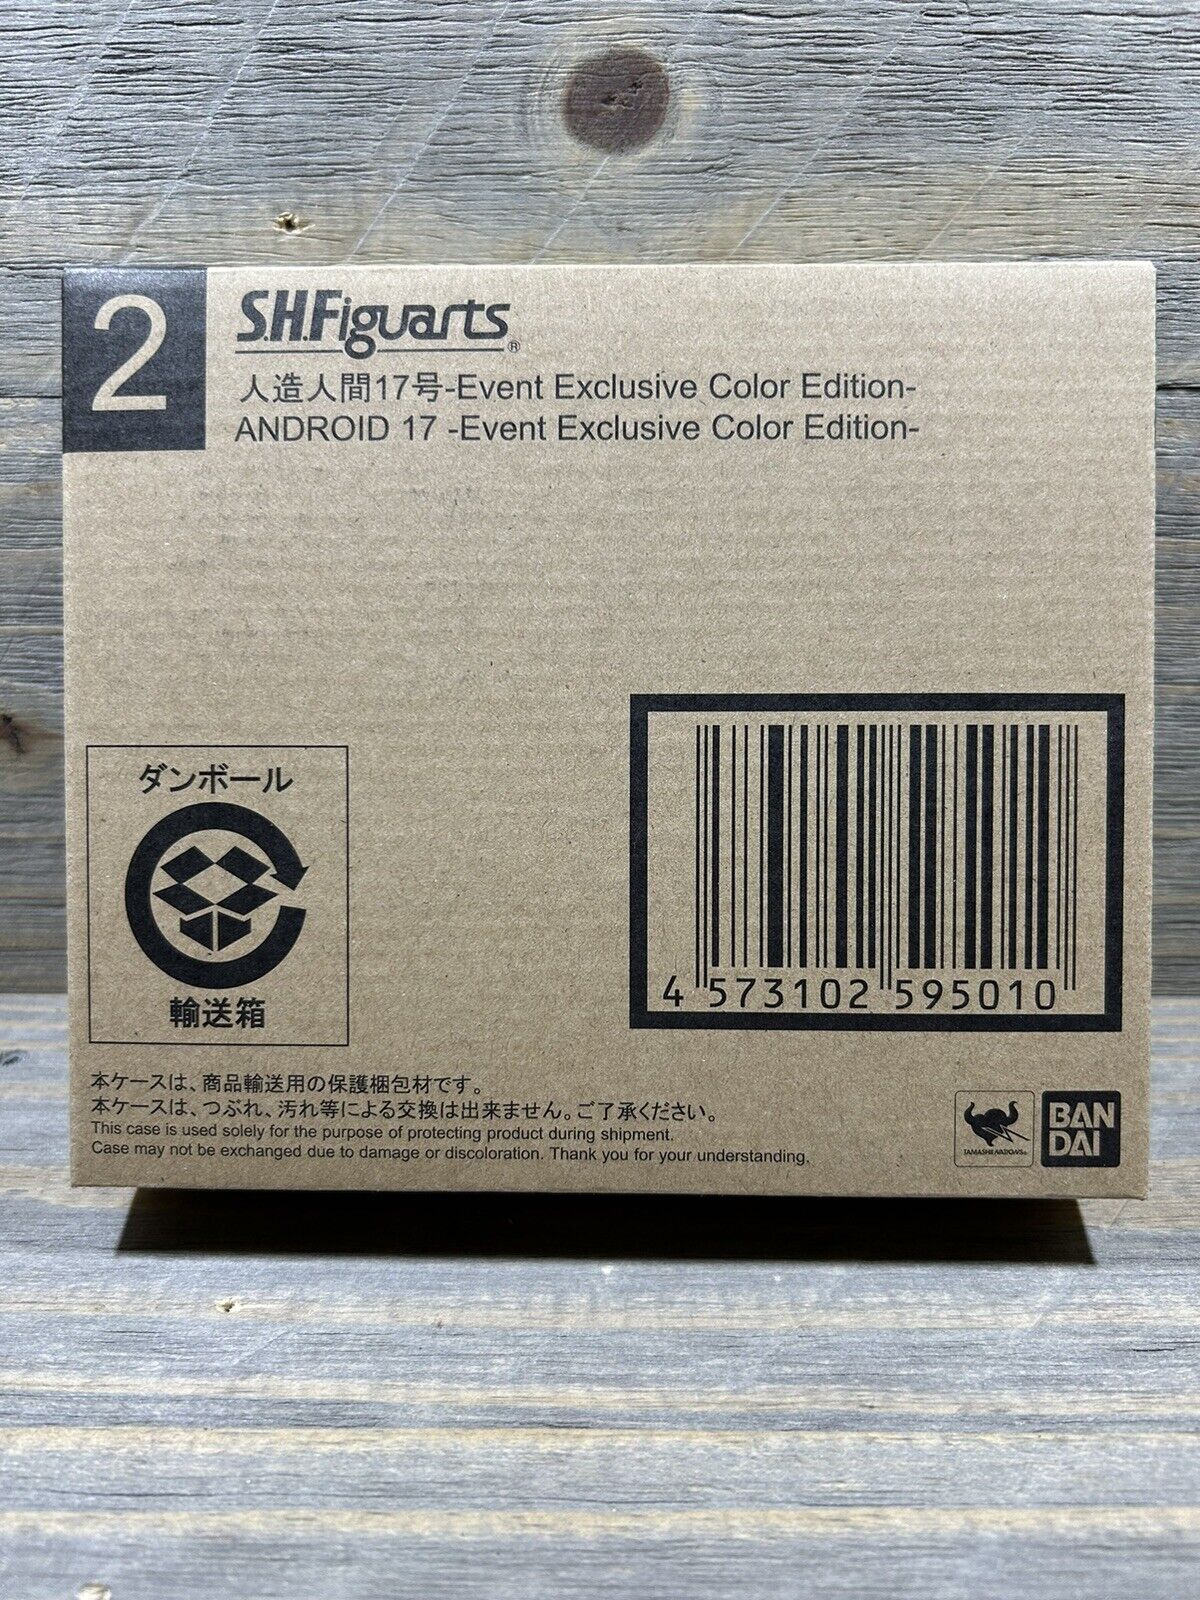 New SH Figuarts ANDROID 17 Event Exclusive Color Edition, sealed in shipper